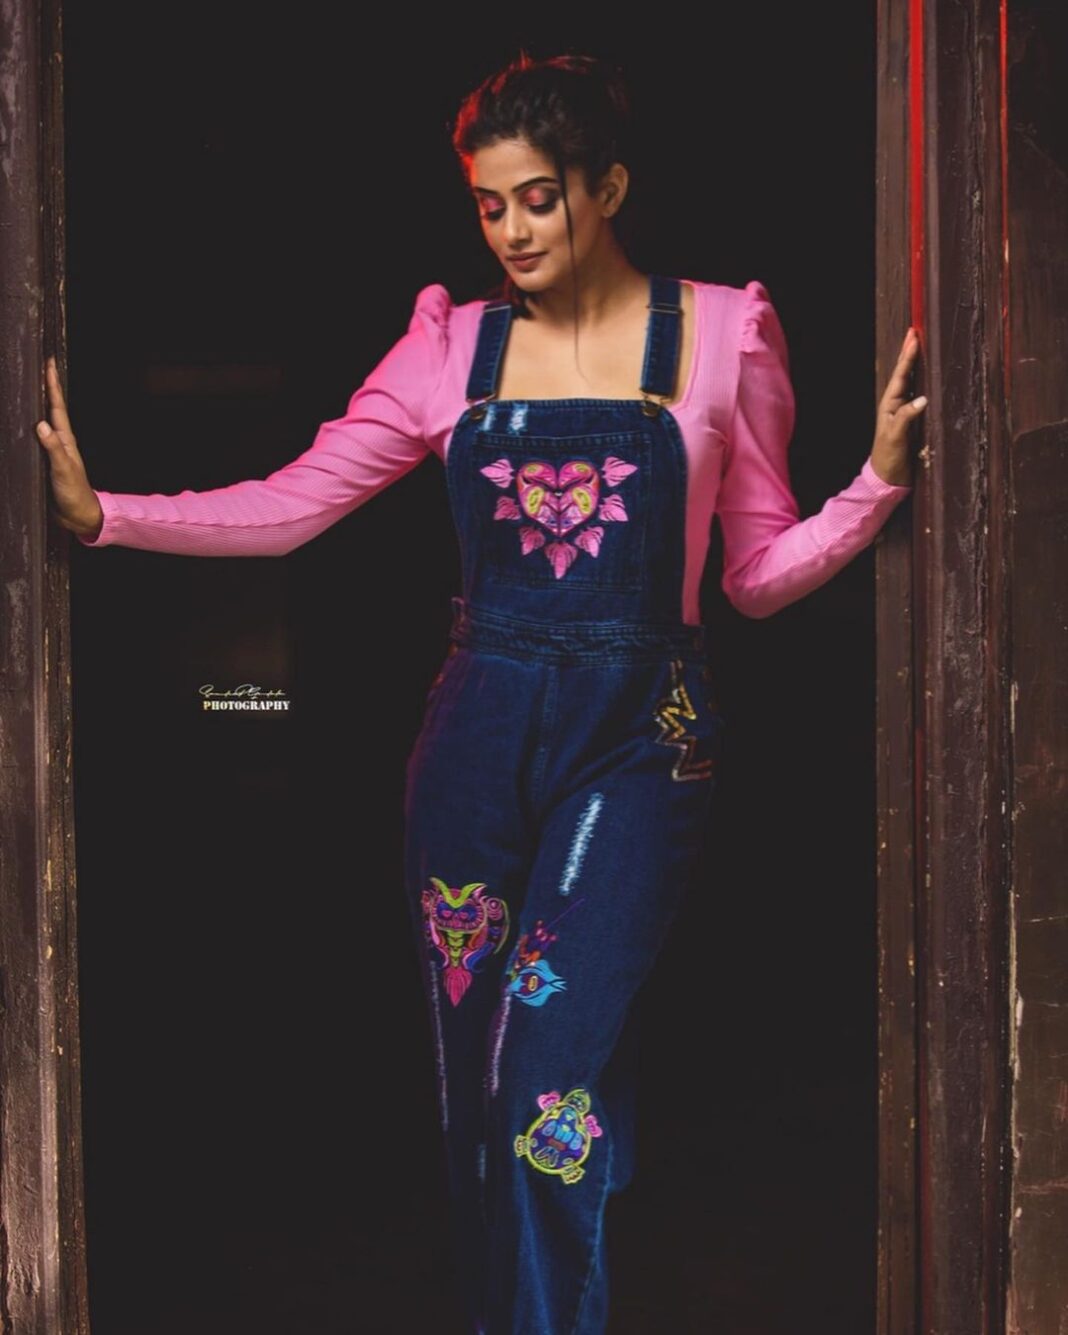 Priyamani Instagram - Wearing this super cute dungarees by @manisharorafashion for @koovsfashion !! Top by @hm !! Styled my by louuuuuuu @mehekshetty !! Pics courtesy one of my favourites @sandeepgudalaphotography 🤗🤗🤗 Makeup and hairstyle by my favourites @pradeep_makeup and @shobhahawale ❤️.. assistant @kakarla.p 🙏🏻🙏🏻🙏🏻🙏🏻#dheechampions #etv #youdontwanttomissthis #